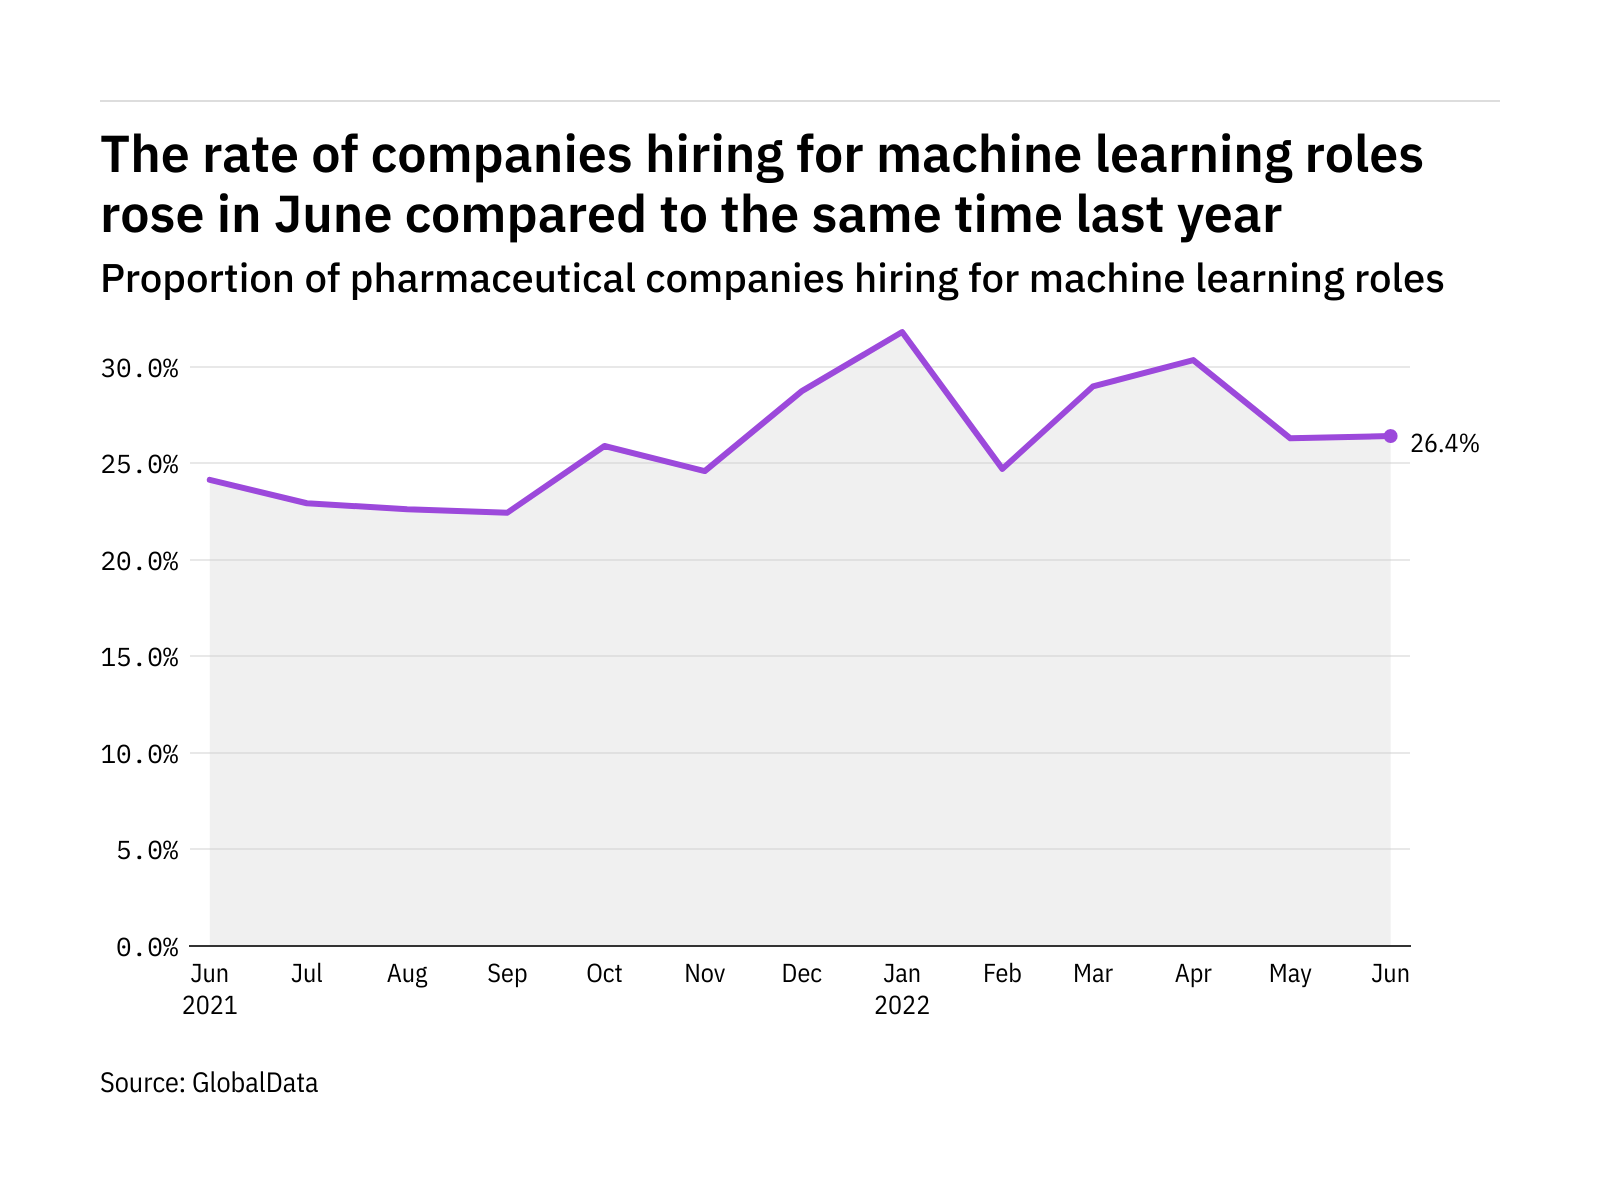 Machine learning hiring levels in the pharmaceutical industry rose in June 2022